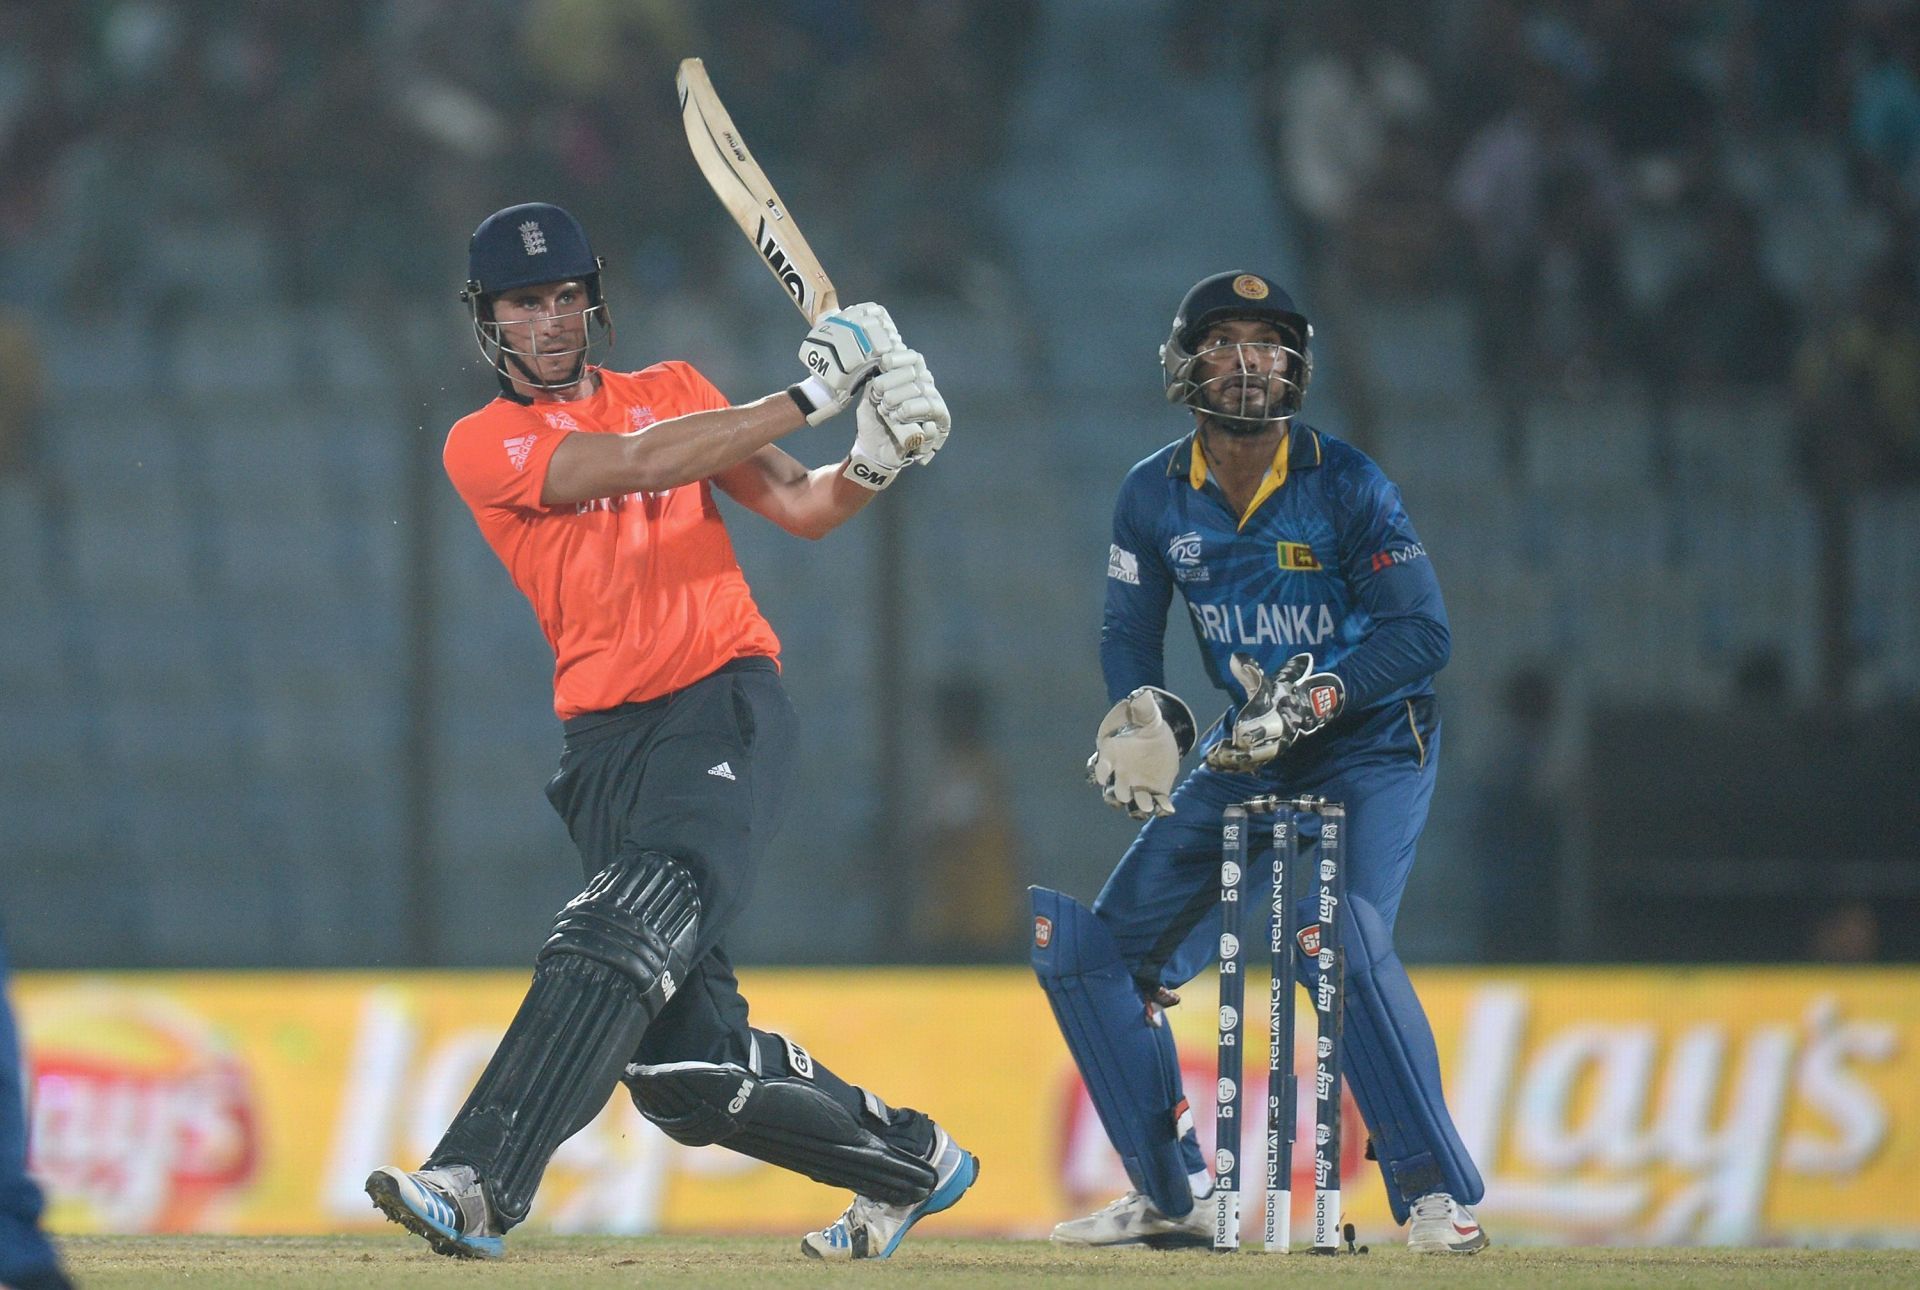 Alex Hales stunned the eventual winners of the 2014 T20 World Cup with a breathtaking century in Chattogram